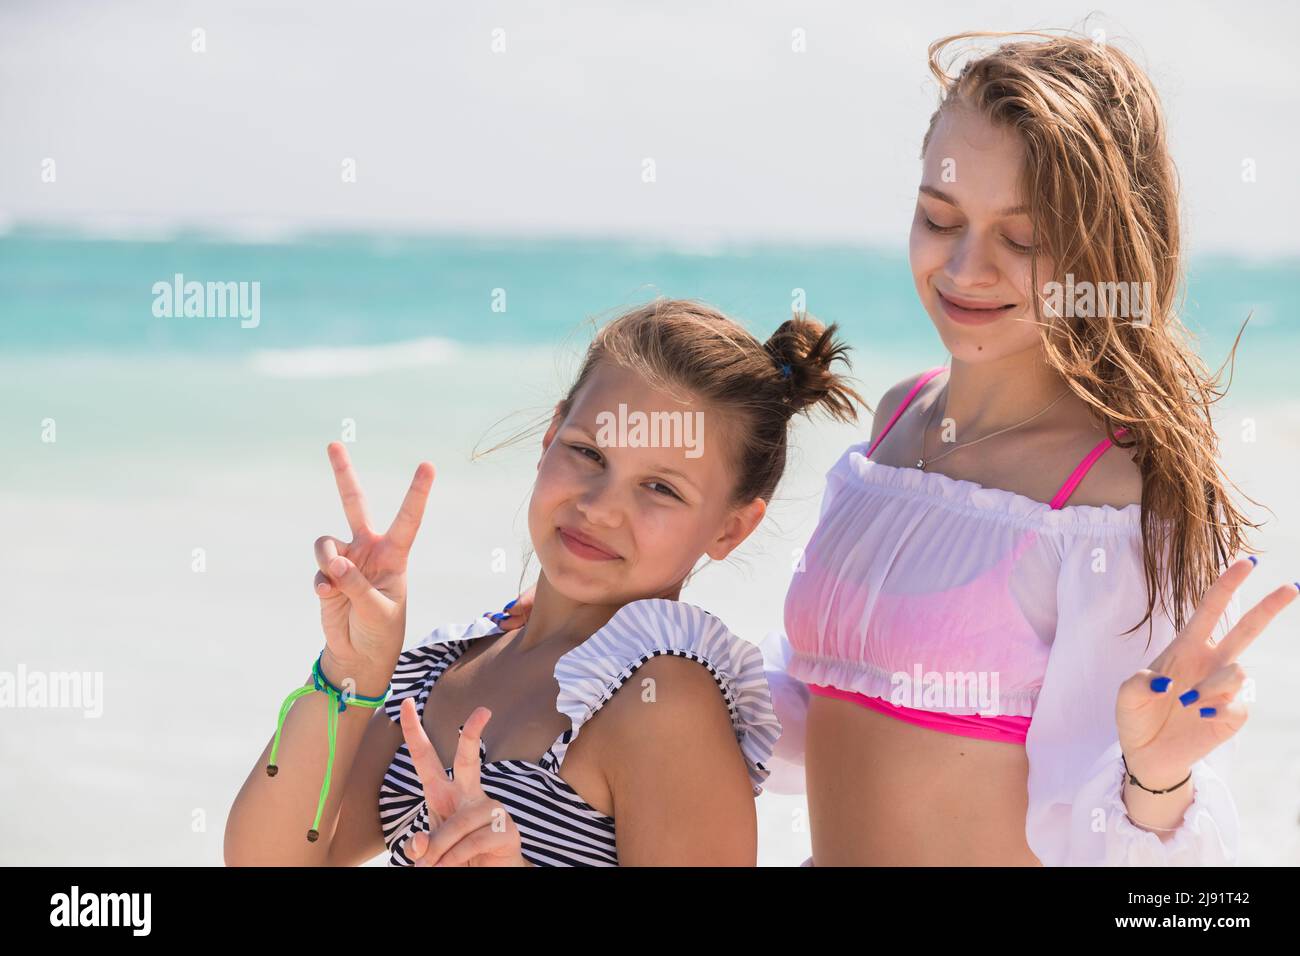 Real sisters are on the vacation. Outdoor portrait of two beautiful Caucasian girls taken at the ocean coast on a sunny day Stock Photo